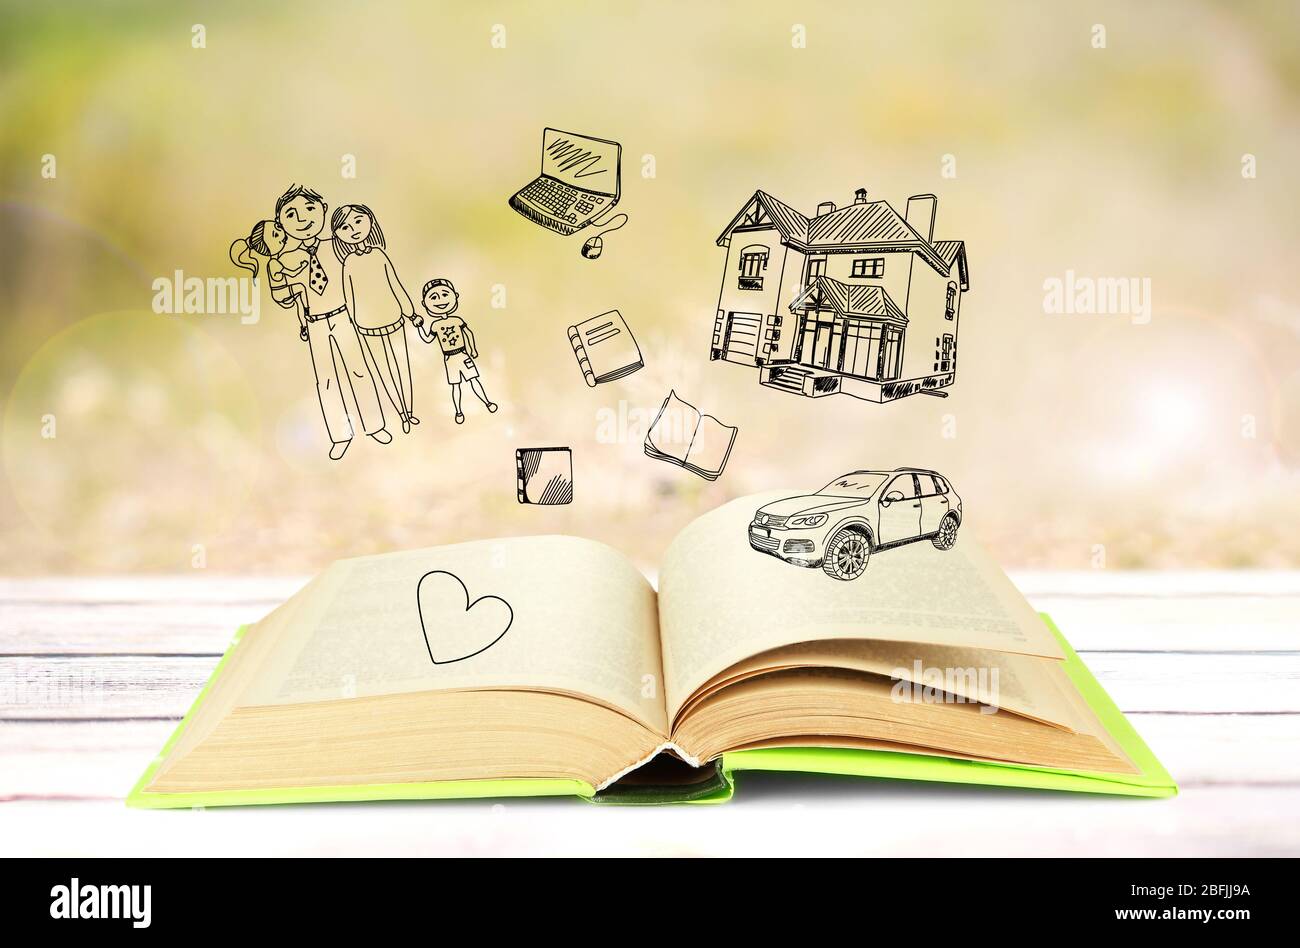 Open book with drawings on light background Stock Photo